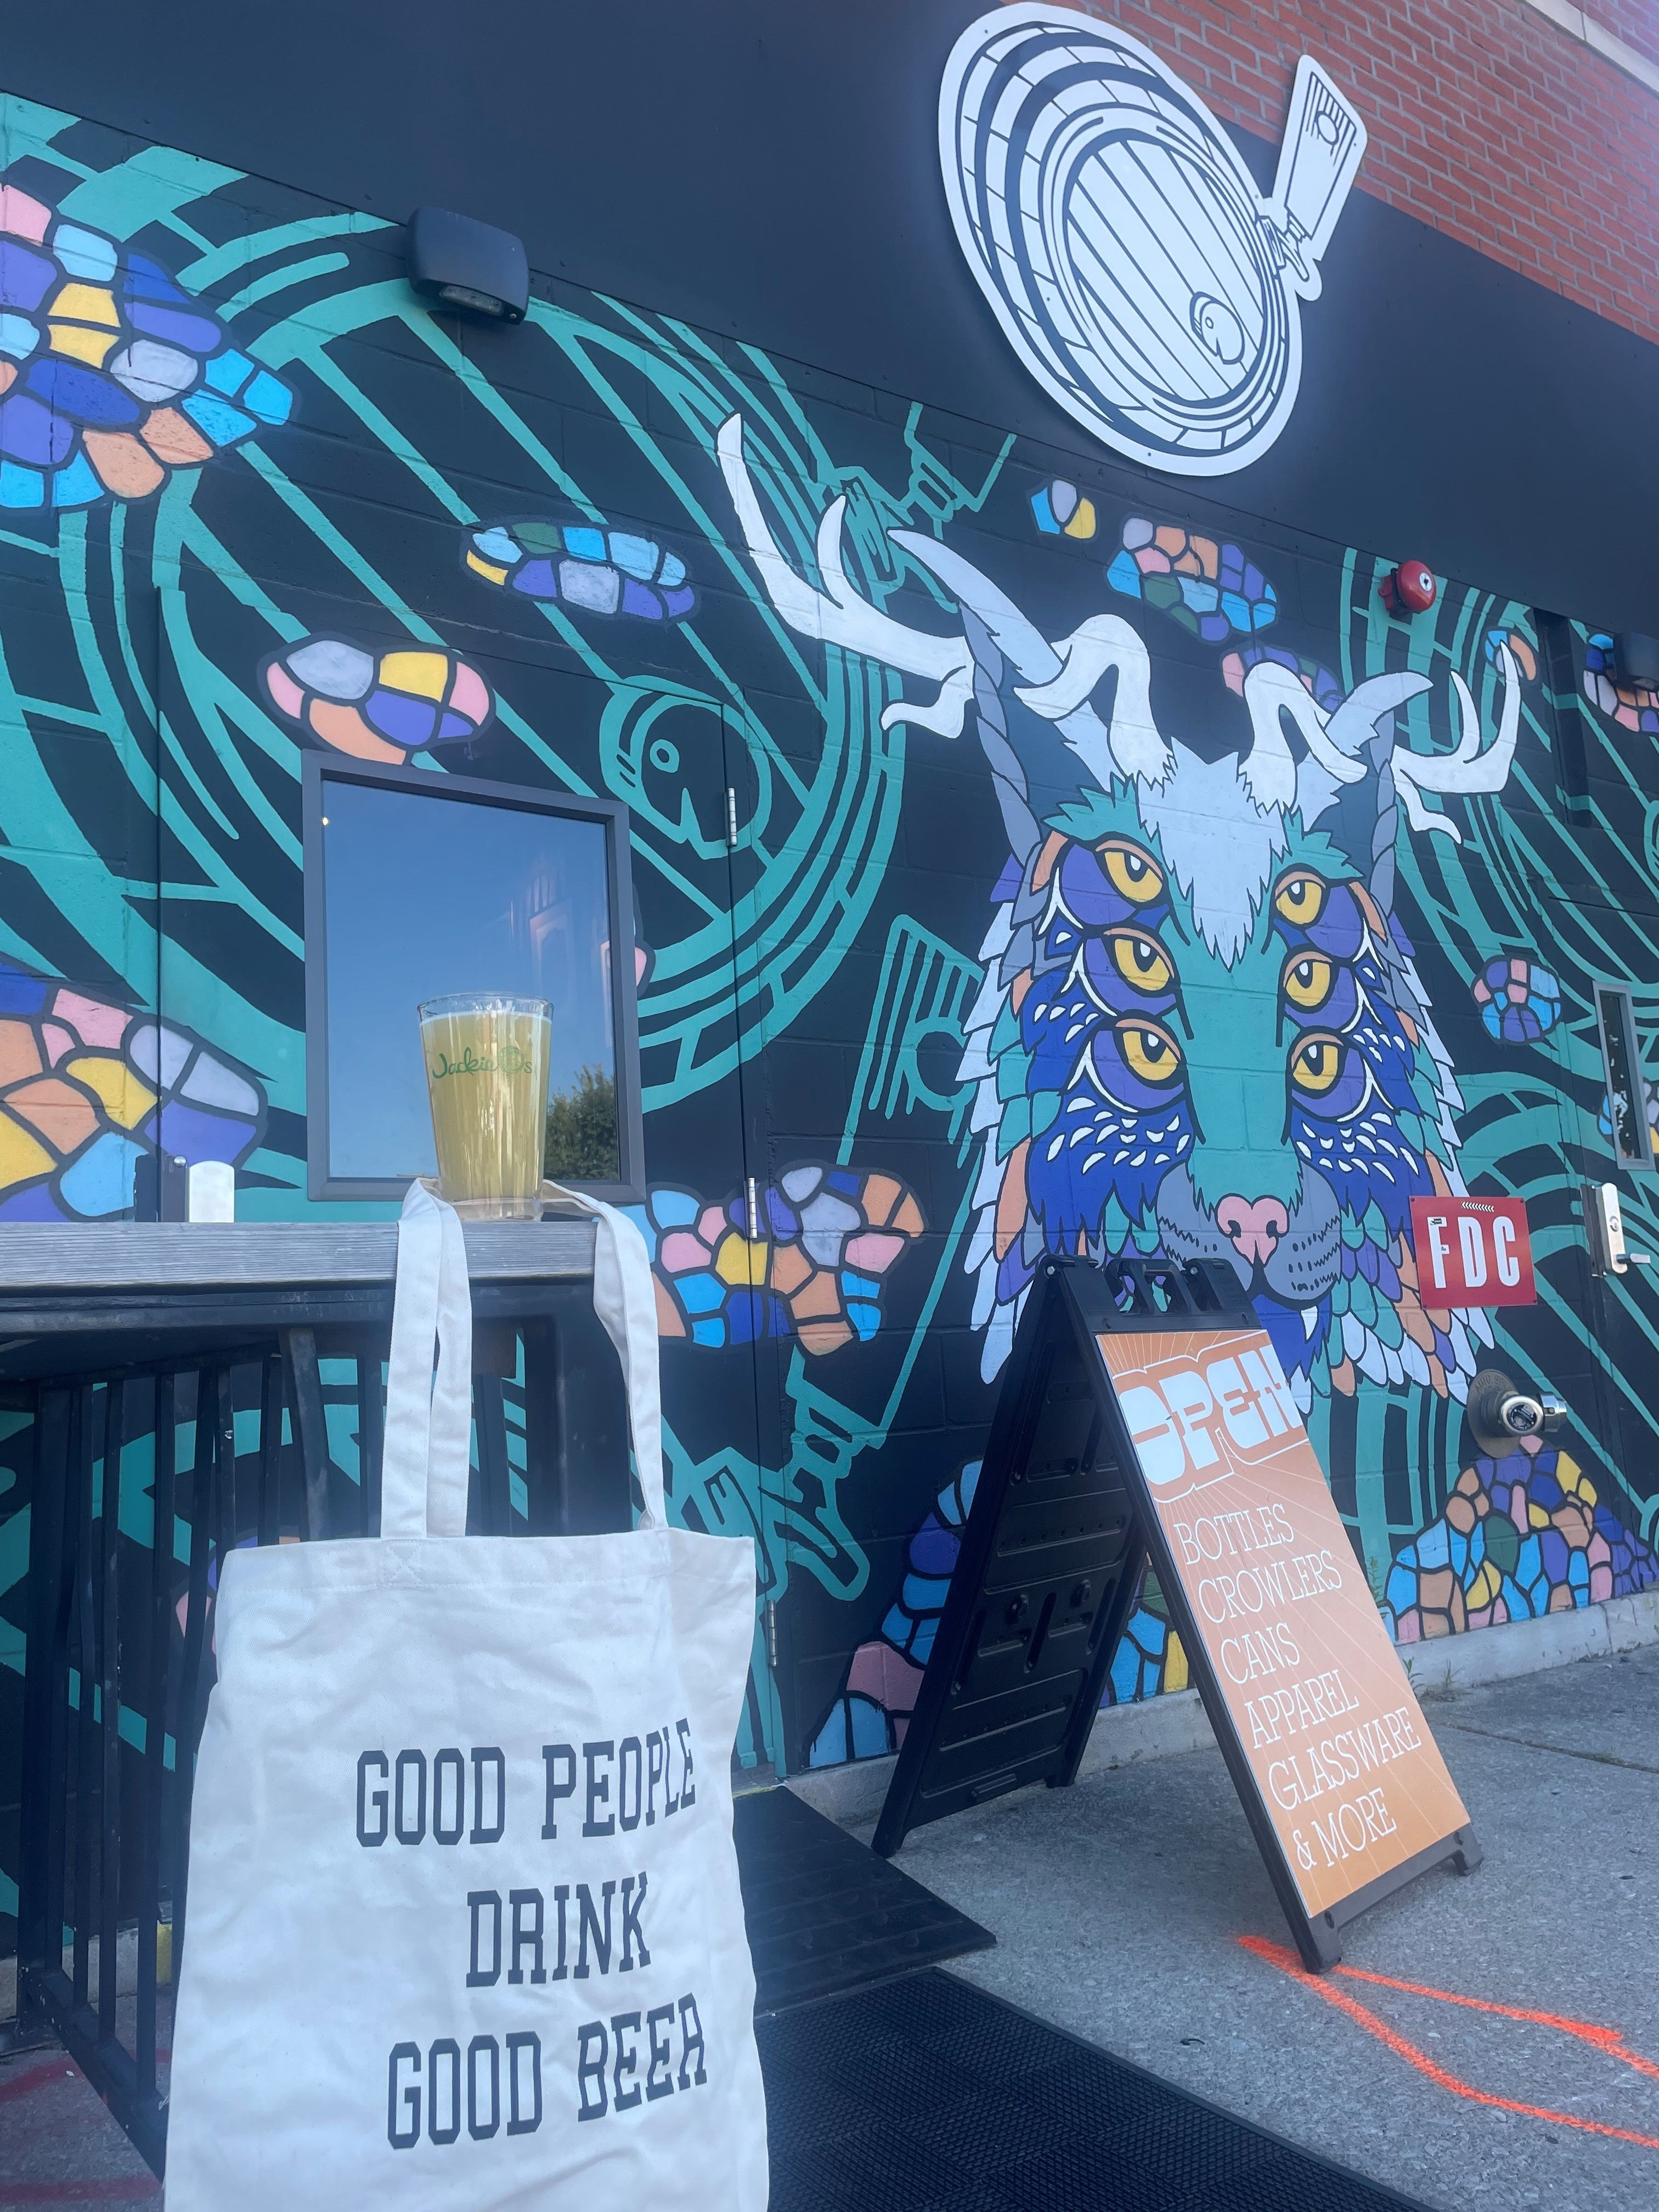 Good People Drink Good Beer Canvas Tote Bag ($350 for case of 100 totes)